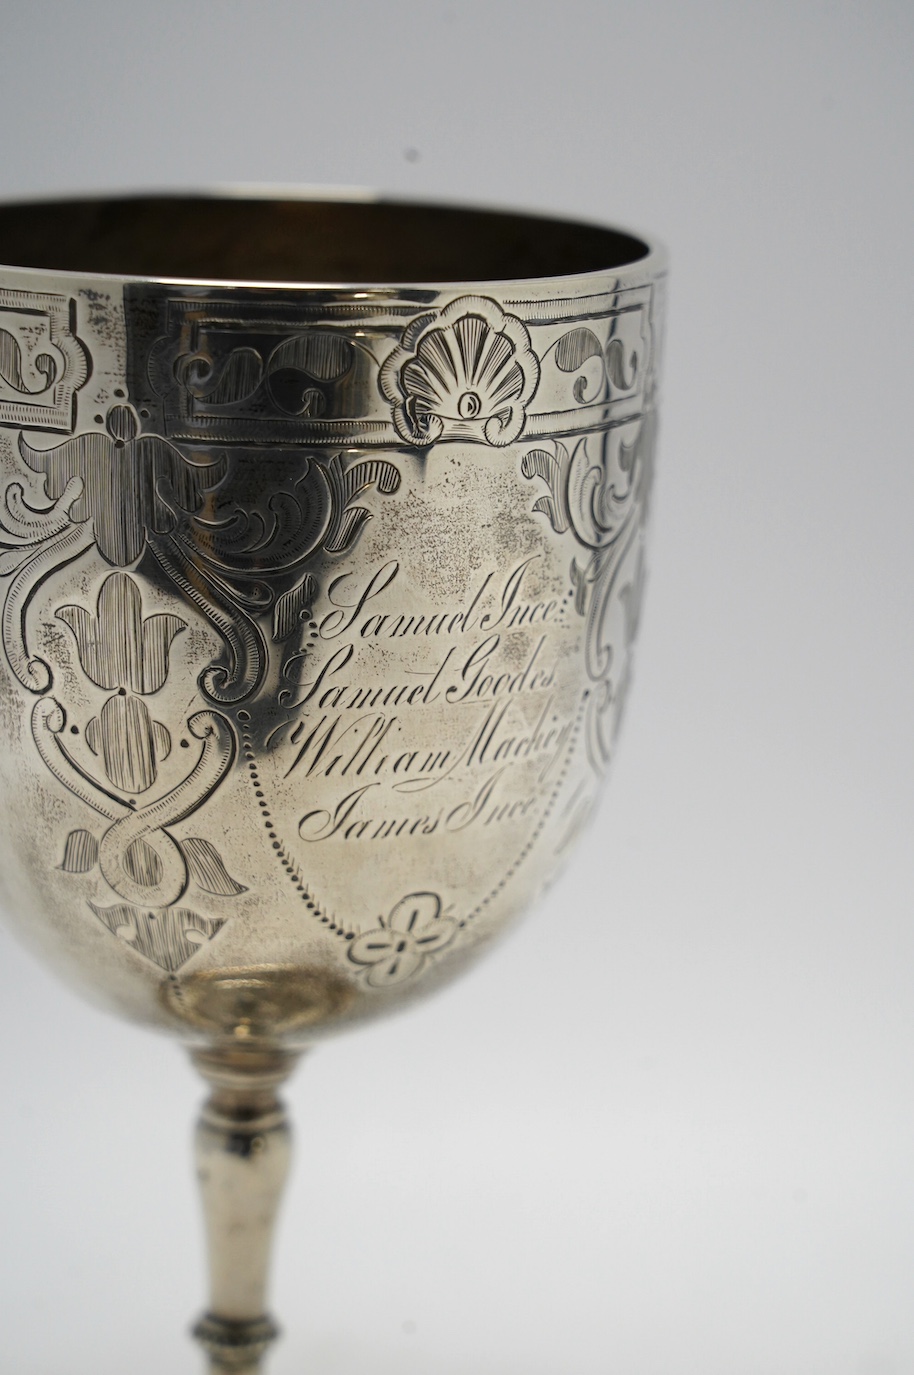 A Victorian engraved silver goblet, by Henry Holland, London, 1863, with engraved inscription, height 18.4cm, 7.9oz. Condition - fair